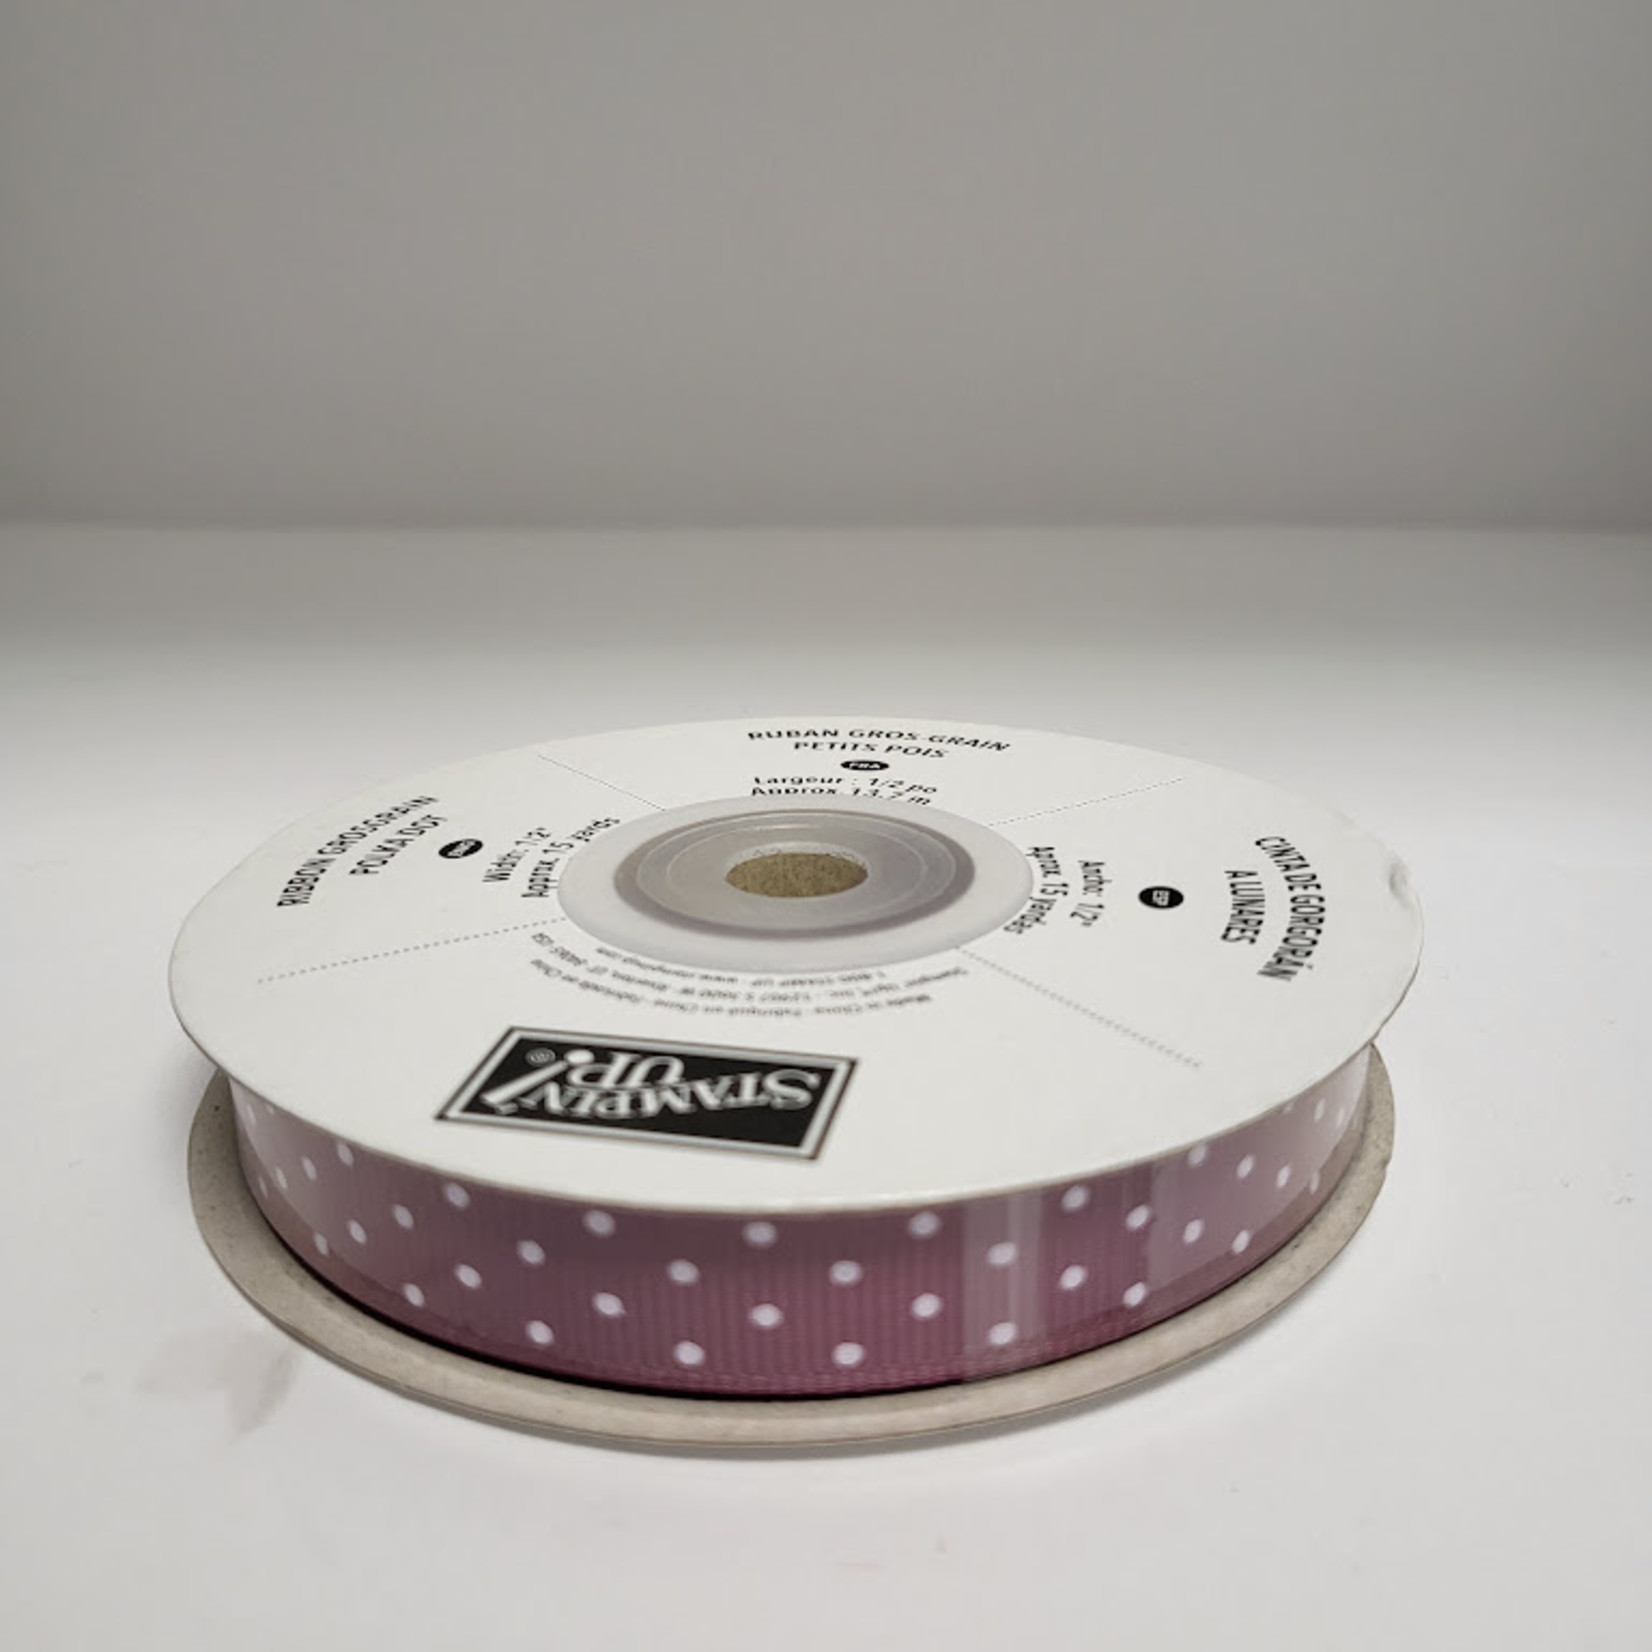 Stampin' Up Grosgrain Ribbon - 1/2" width Appox 15 yards - Rich Razzleberry